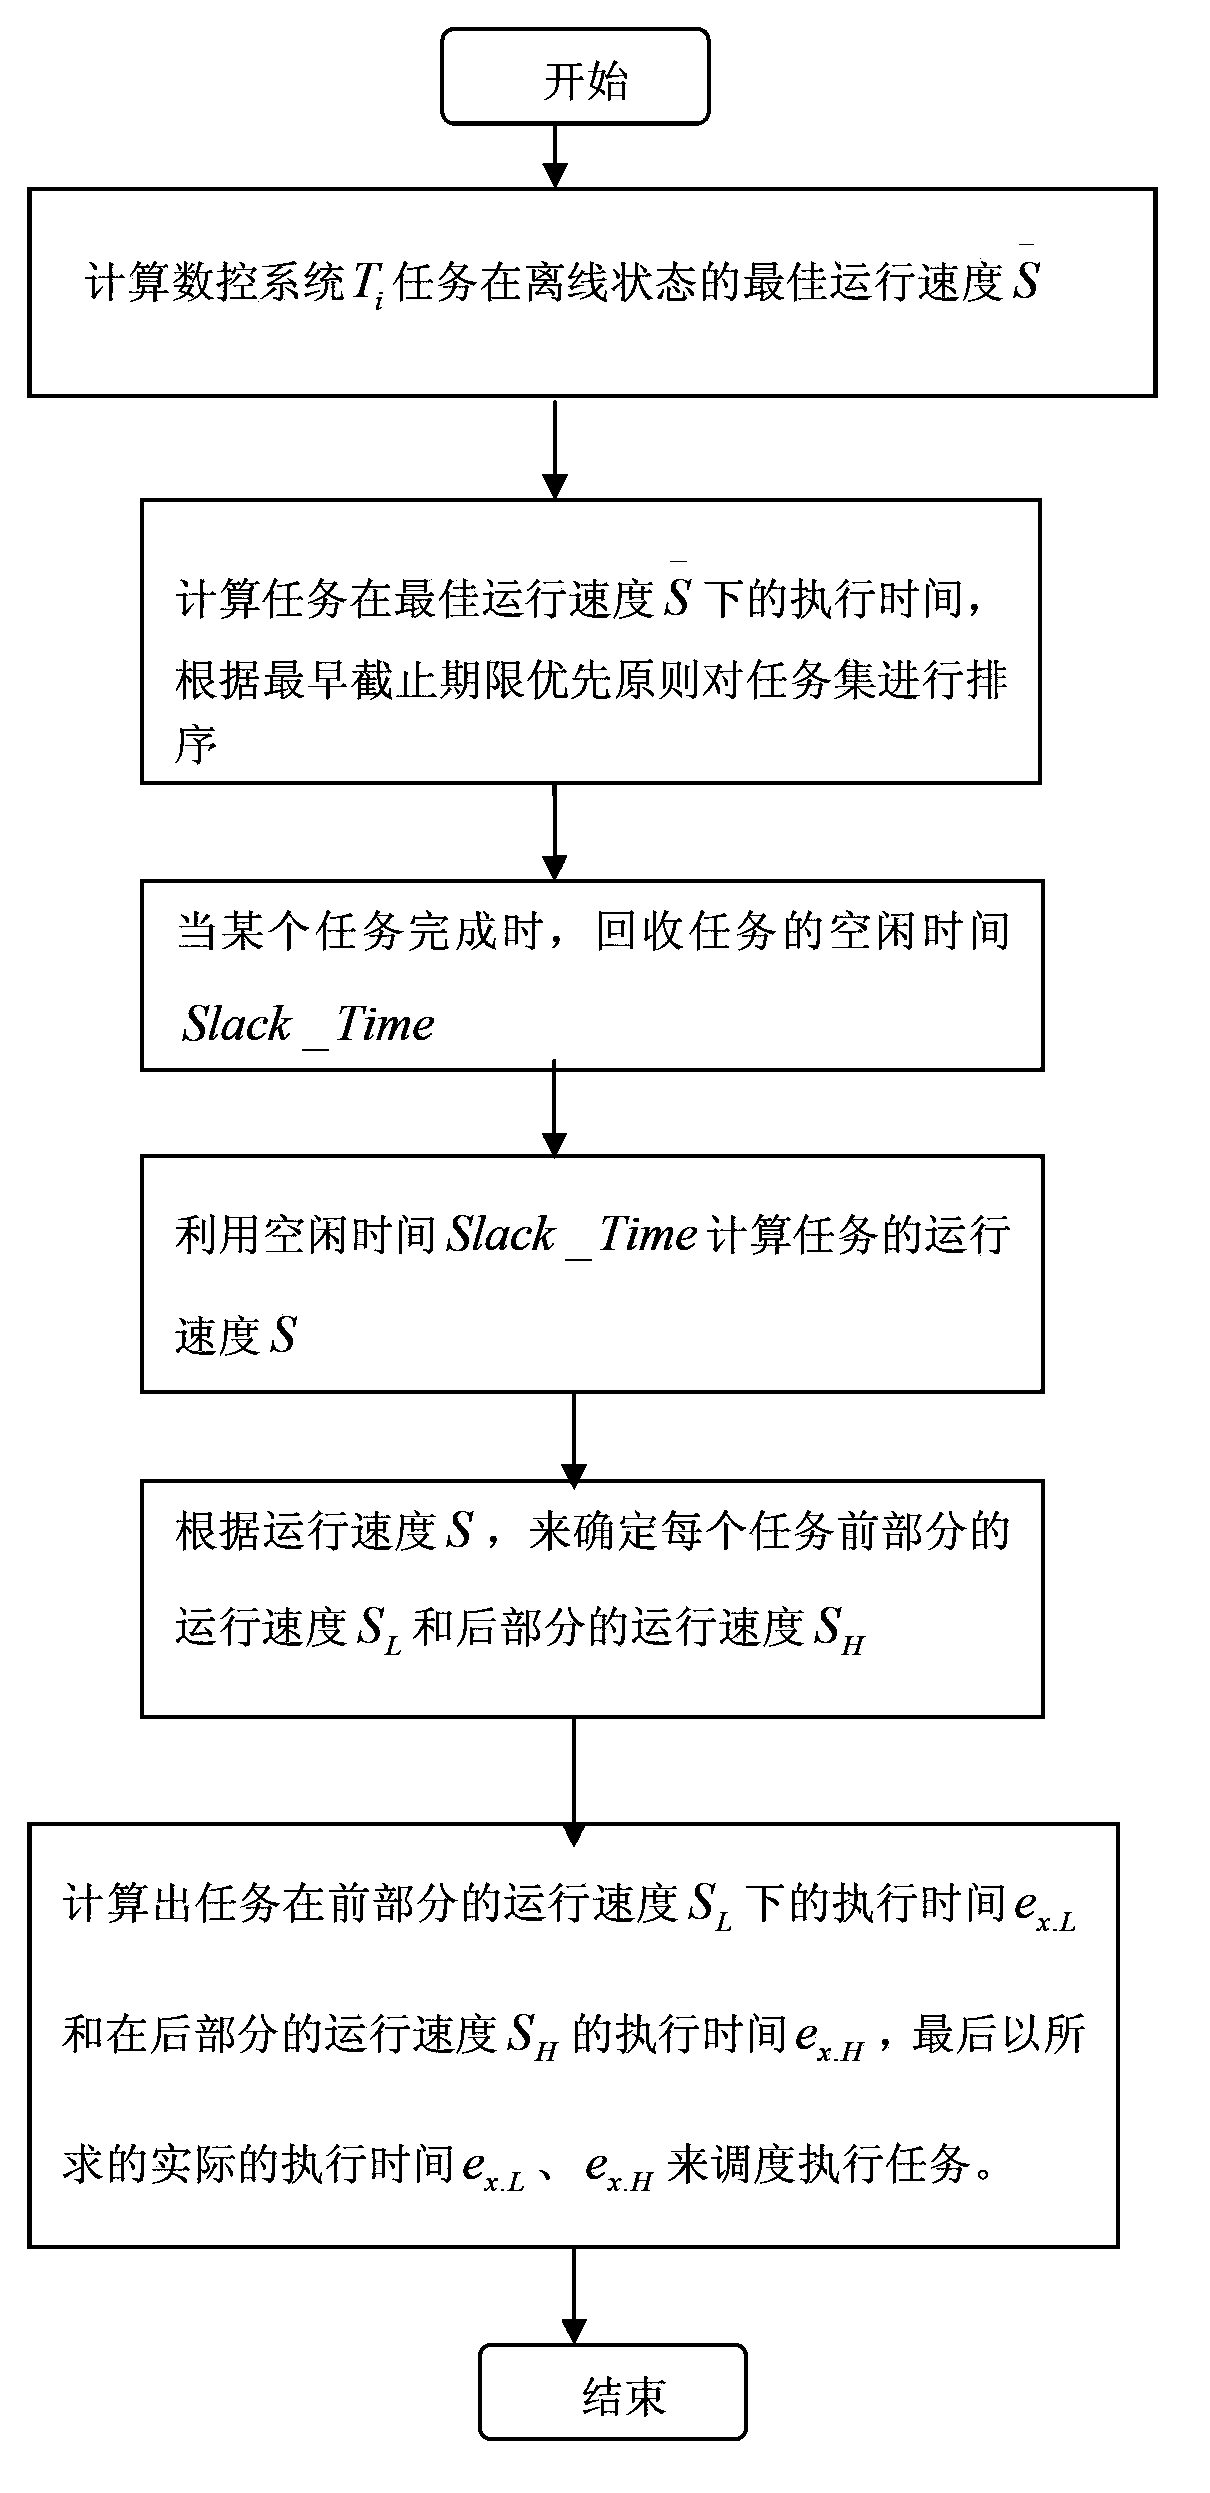 Energy-saving scheduling method suitable for numerical control system periodic tasks